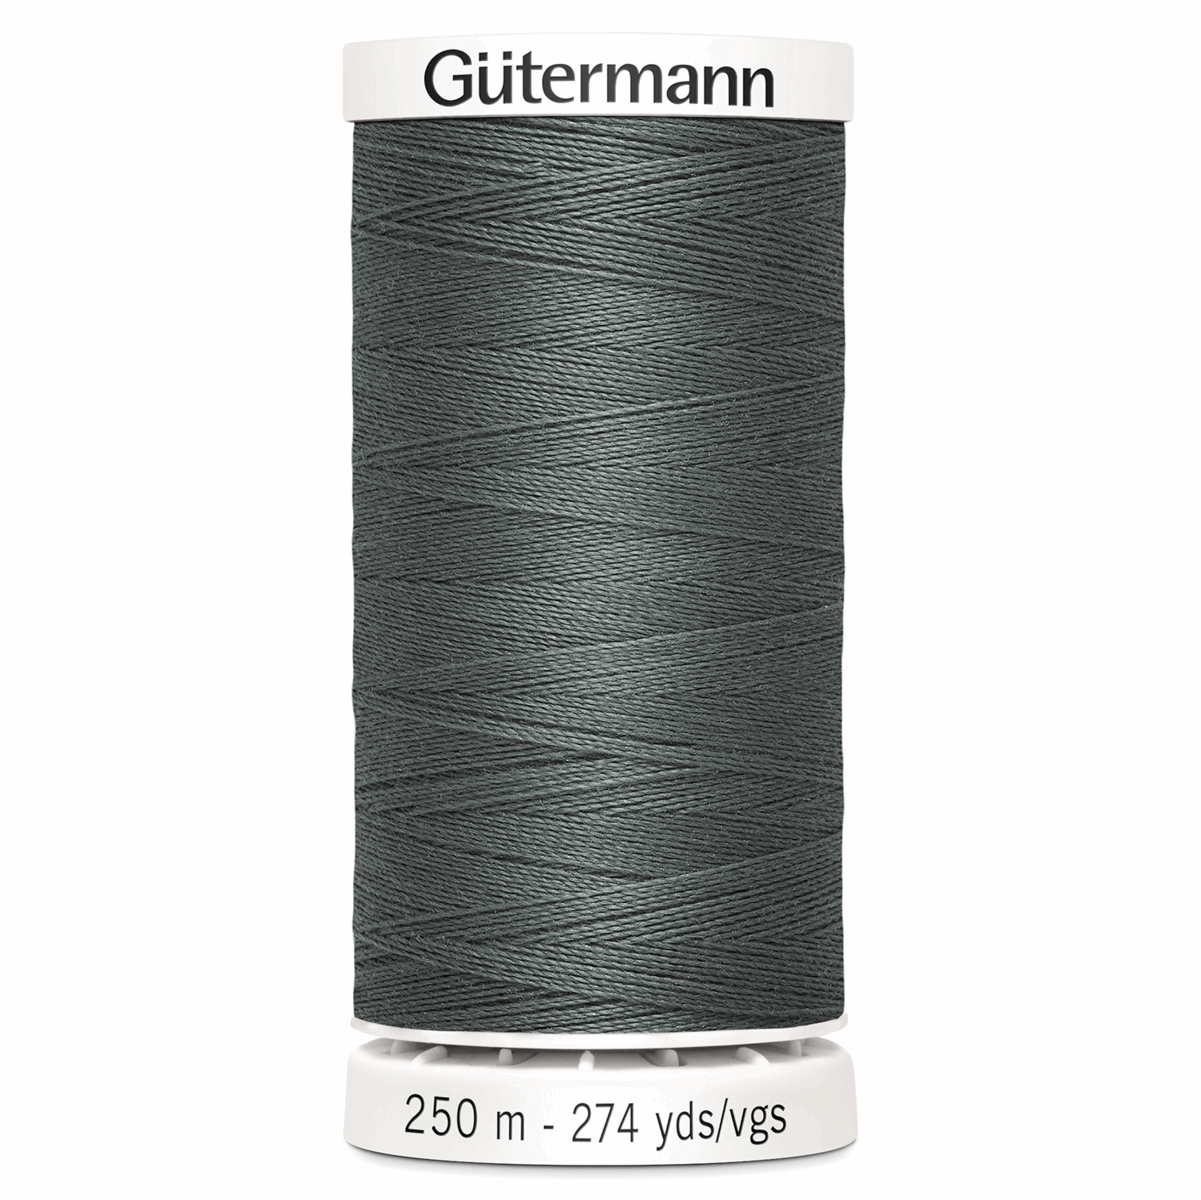 250m size Gutermann Sew-All Polyester Sewing Thread 701 Grey from Jaycotts Sewing Supplies